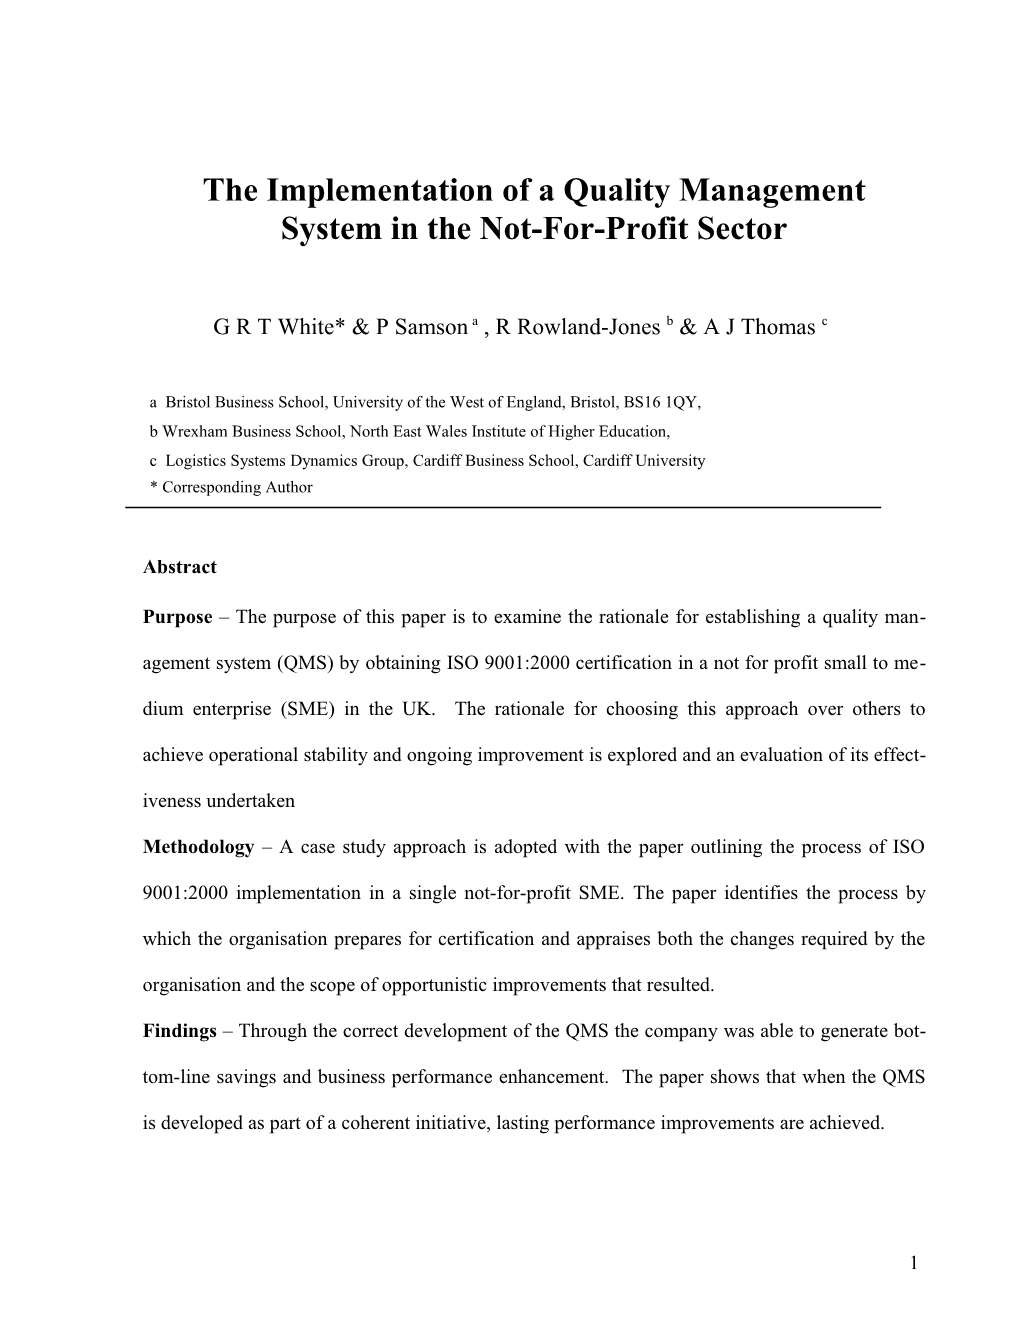 The Implementation of a Quality Management System in the Not-For-Profit Sector